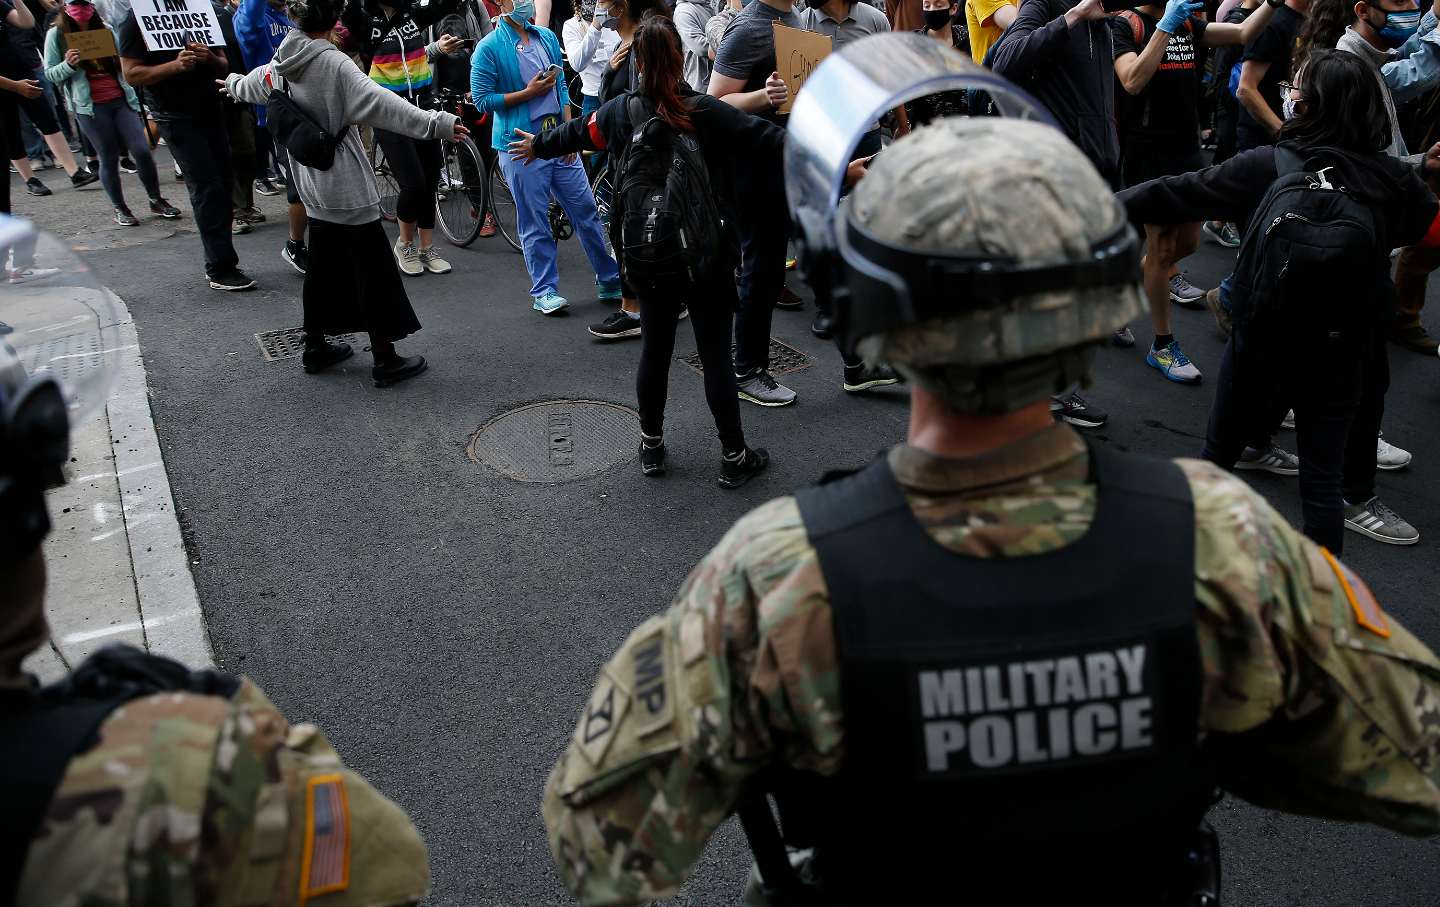 Military police face crowd of marching protesters